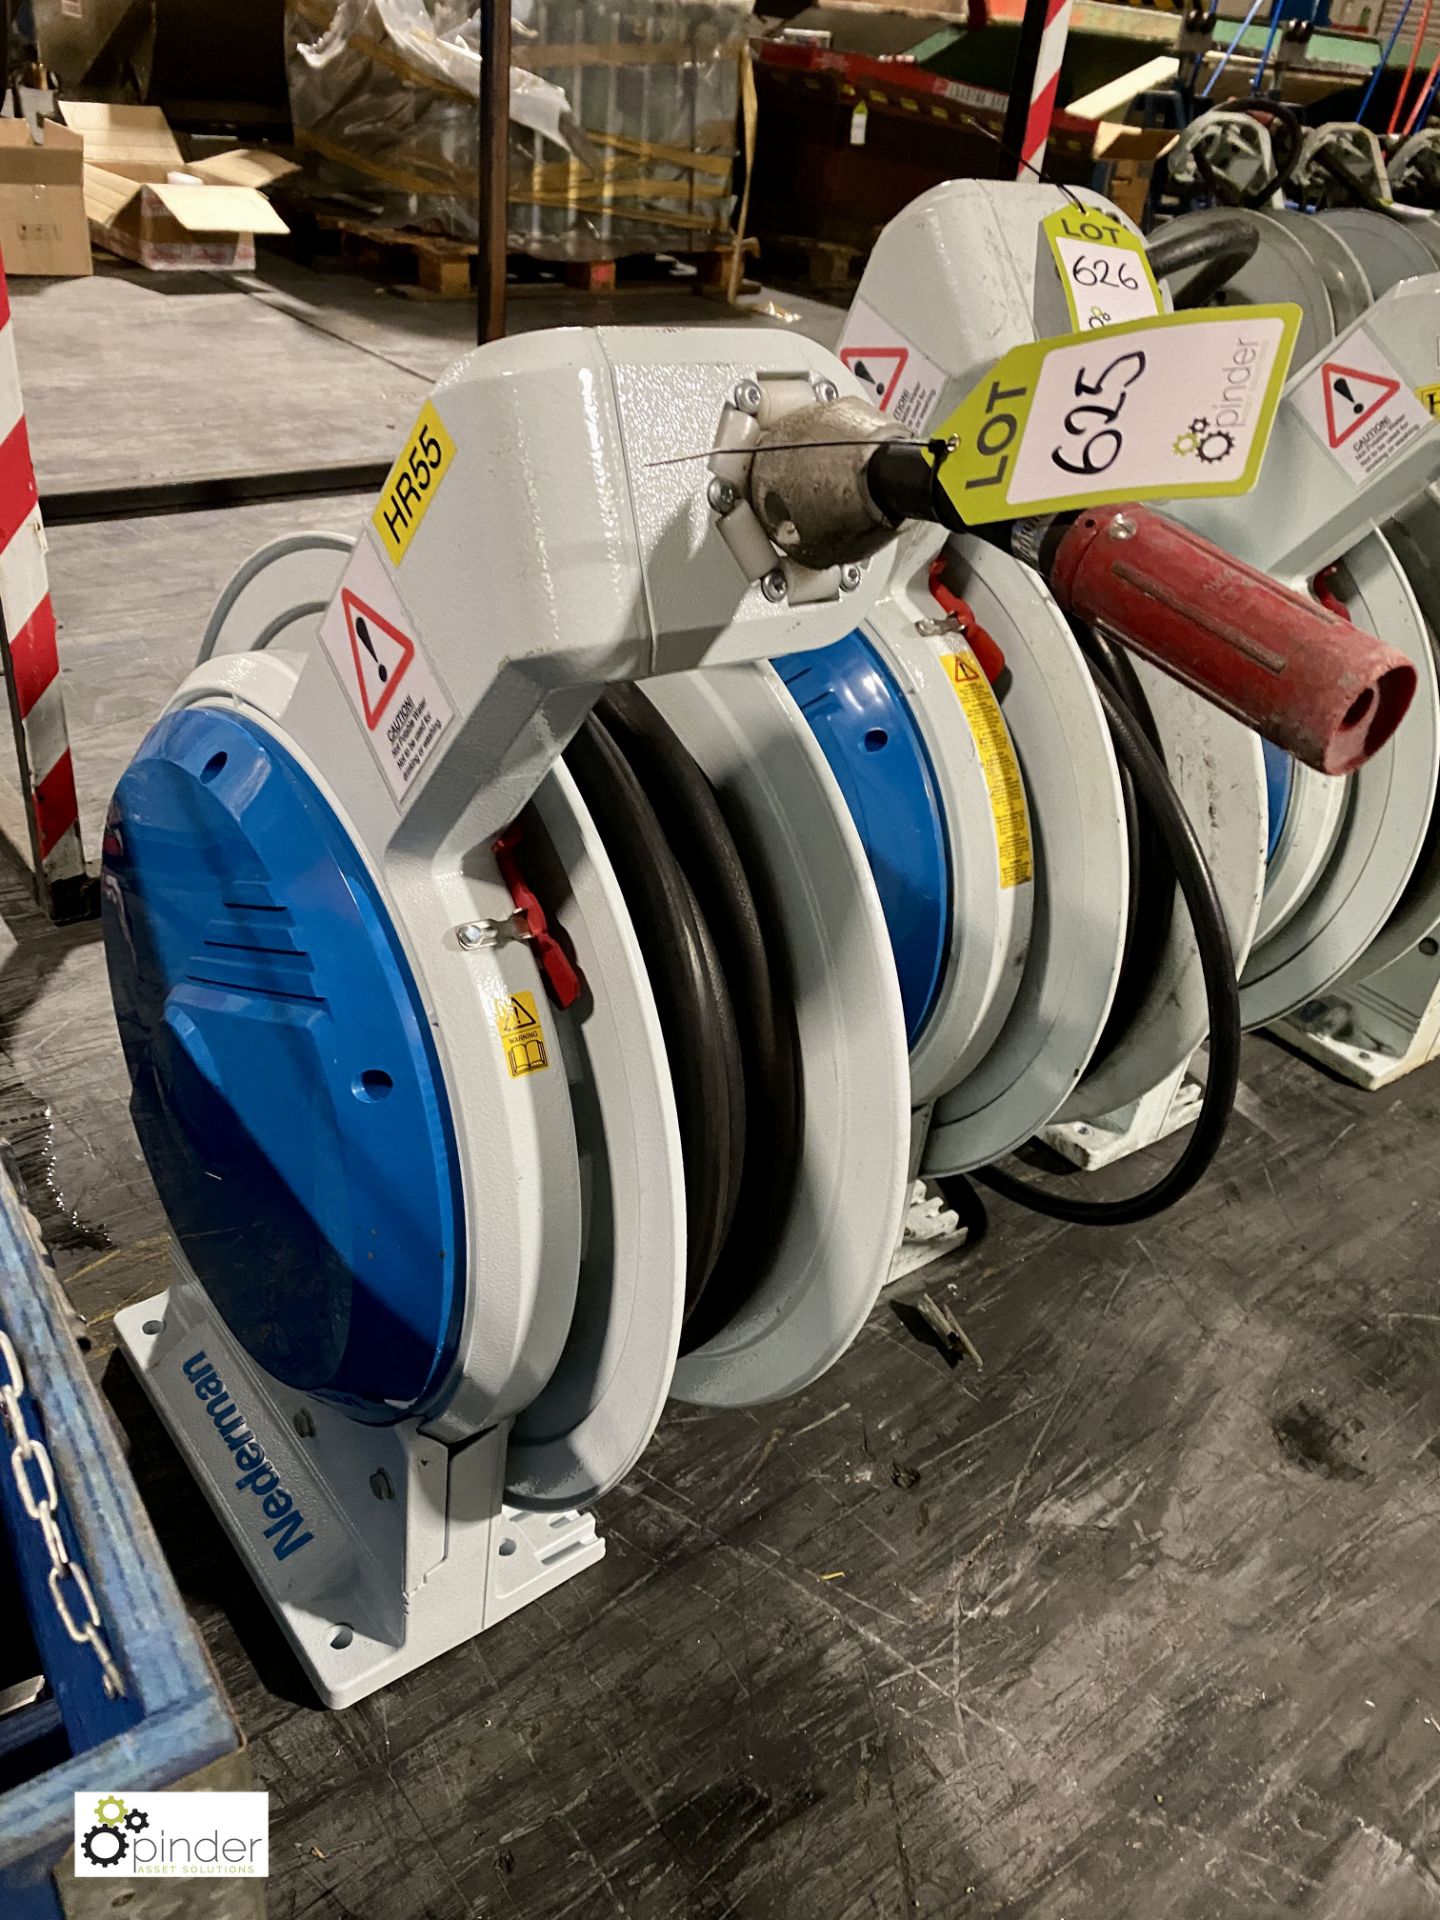 Nederman retractable Hose Reel (please note there